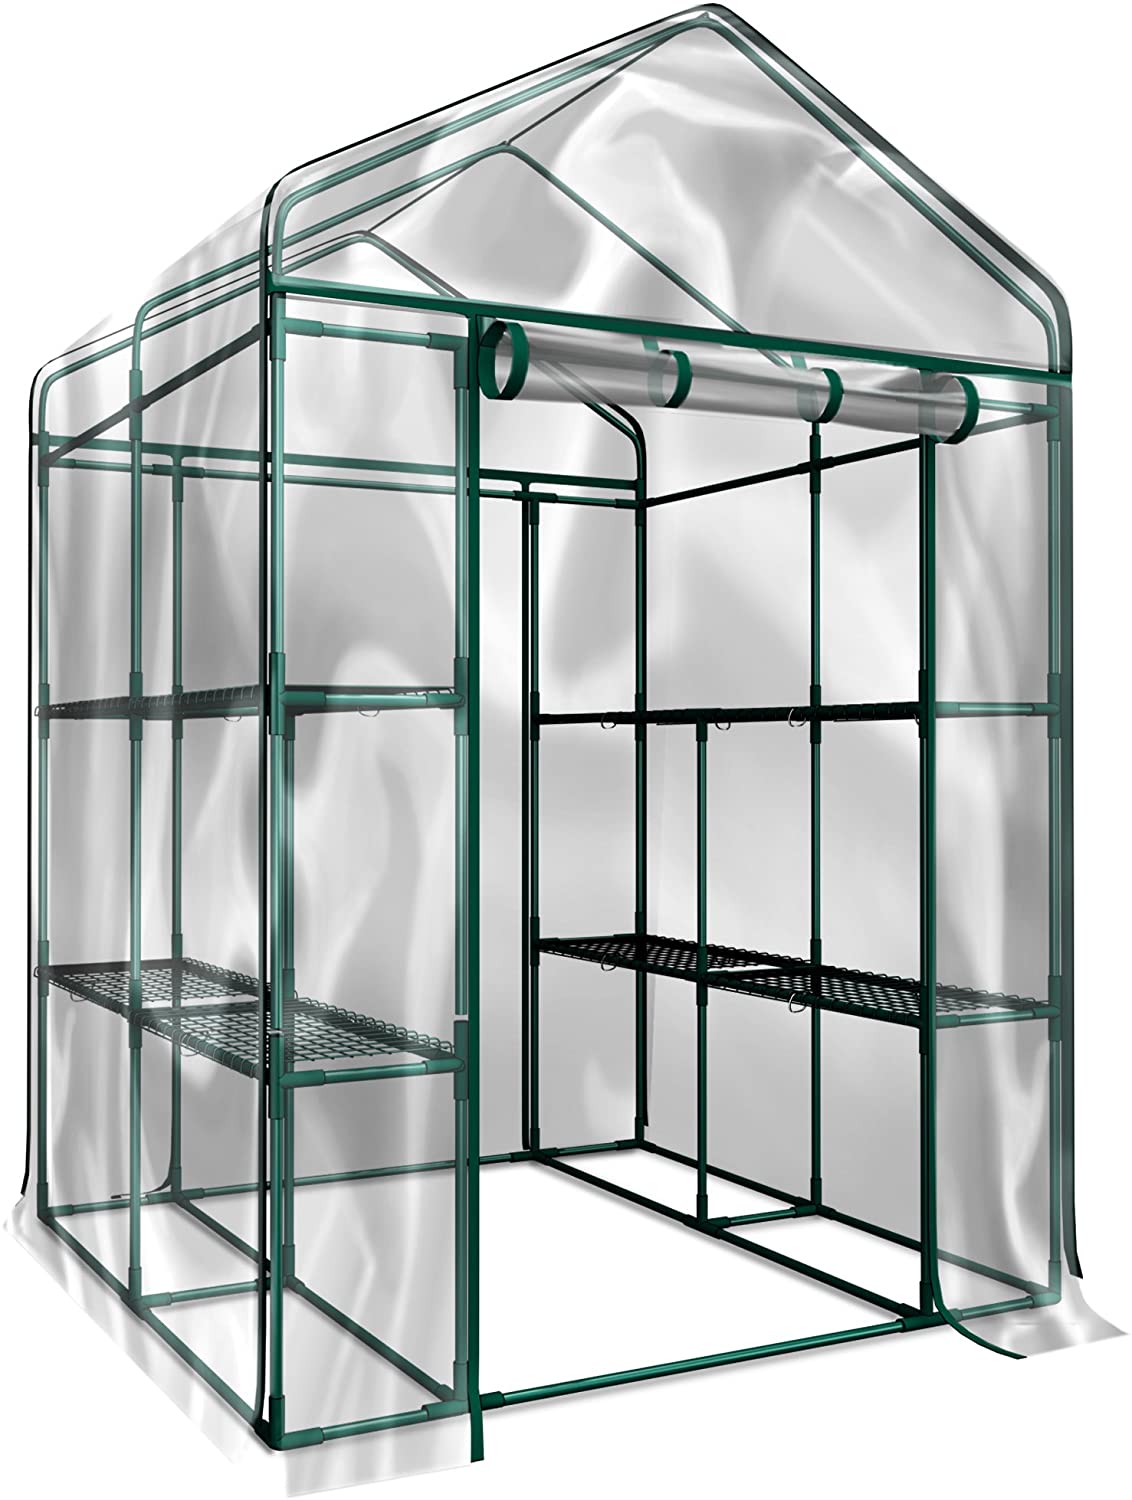 Home-Complete HC-4202 Walk-In Greenhouse- Indoor Outdoor with 8 Sturdy Shelves-Grow Plants, Seedlings, Herbs, or Flowers In Any Season-Gardening Rack - image 1 of 8